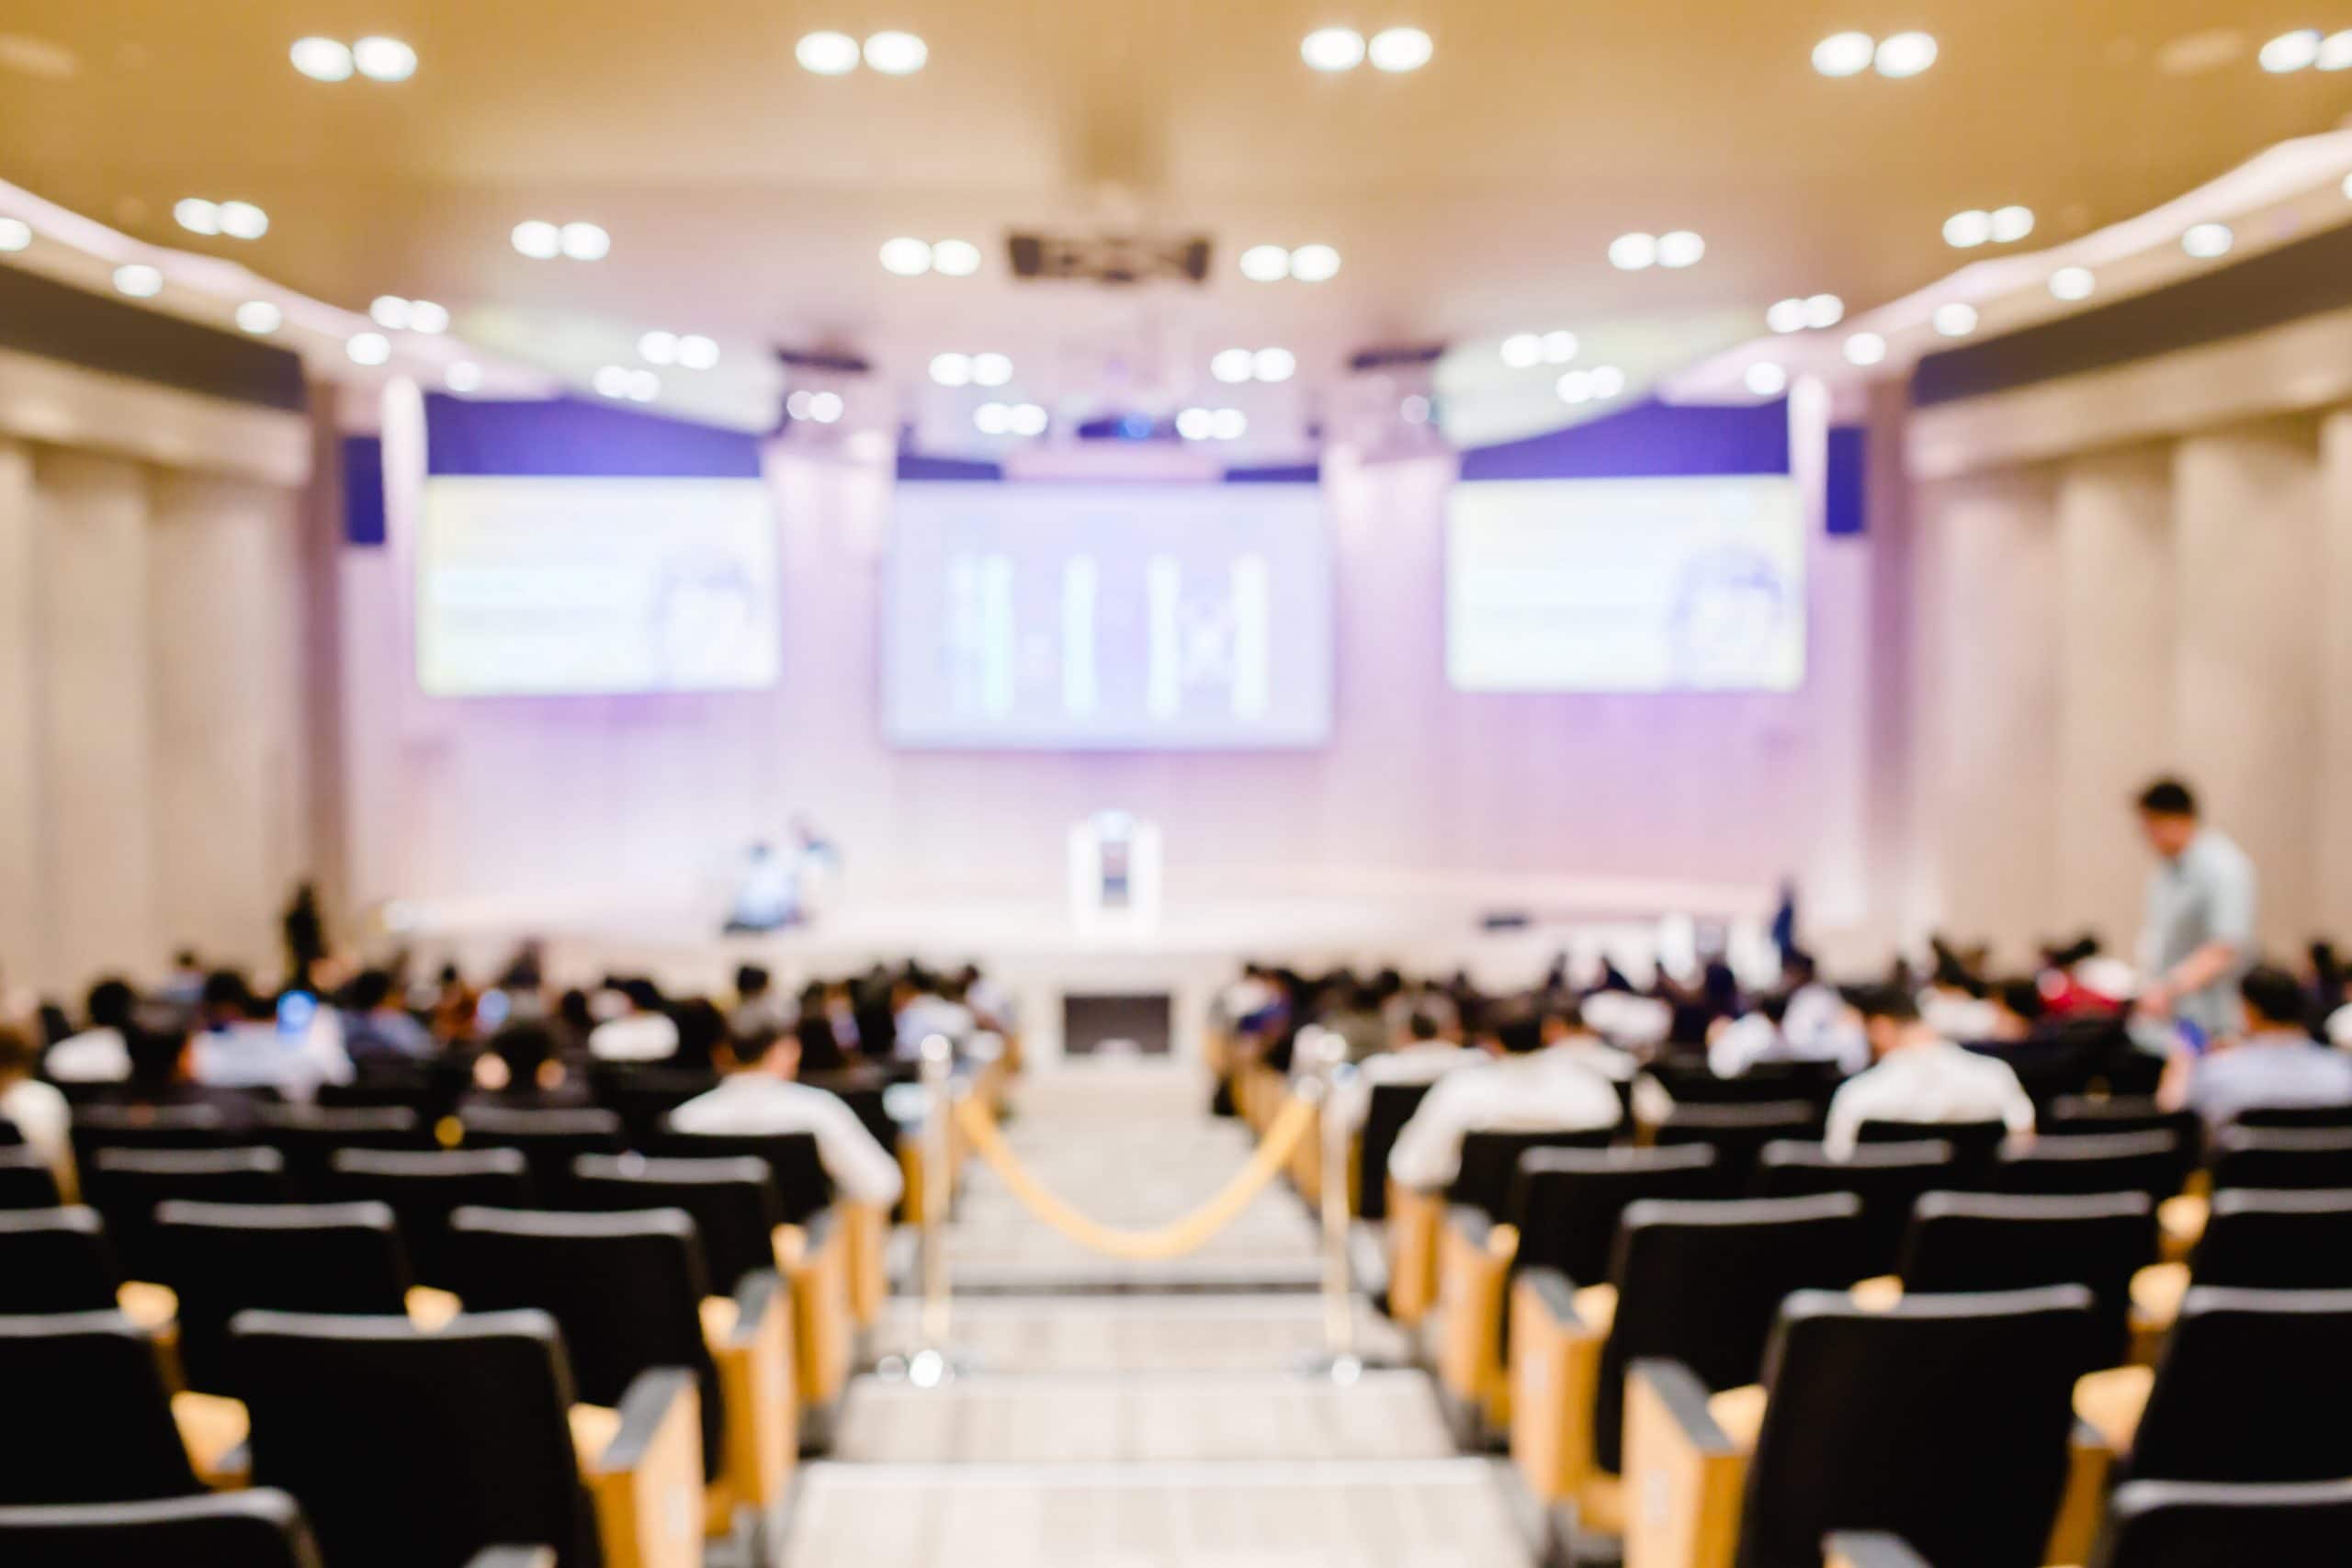 The shareholders' meeting must be convened and organized within the prescribed time and in the prescribed manner. In this article we summarize the most important points to be observed when organizing a shareholders' meeting.